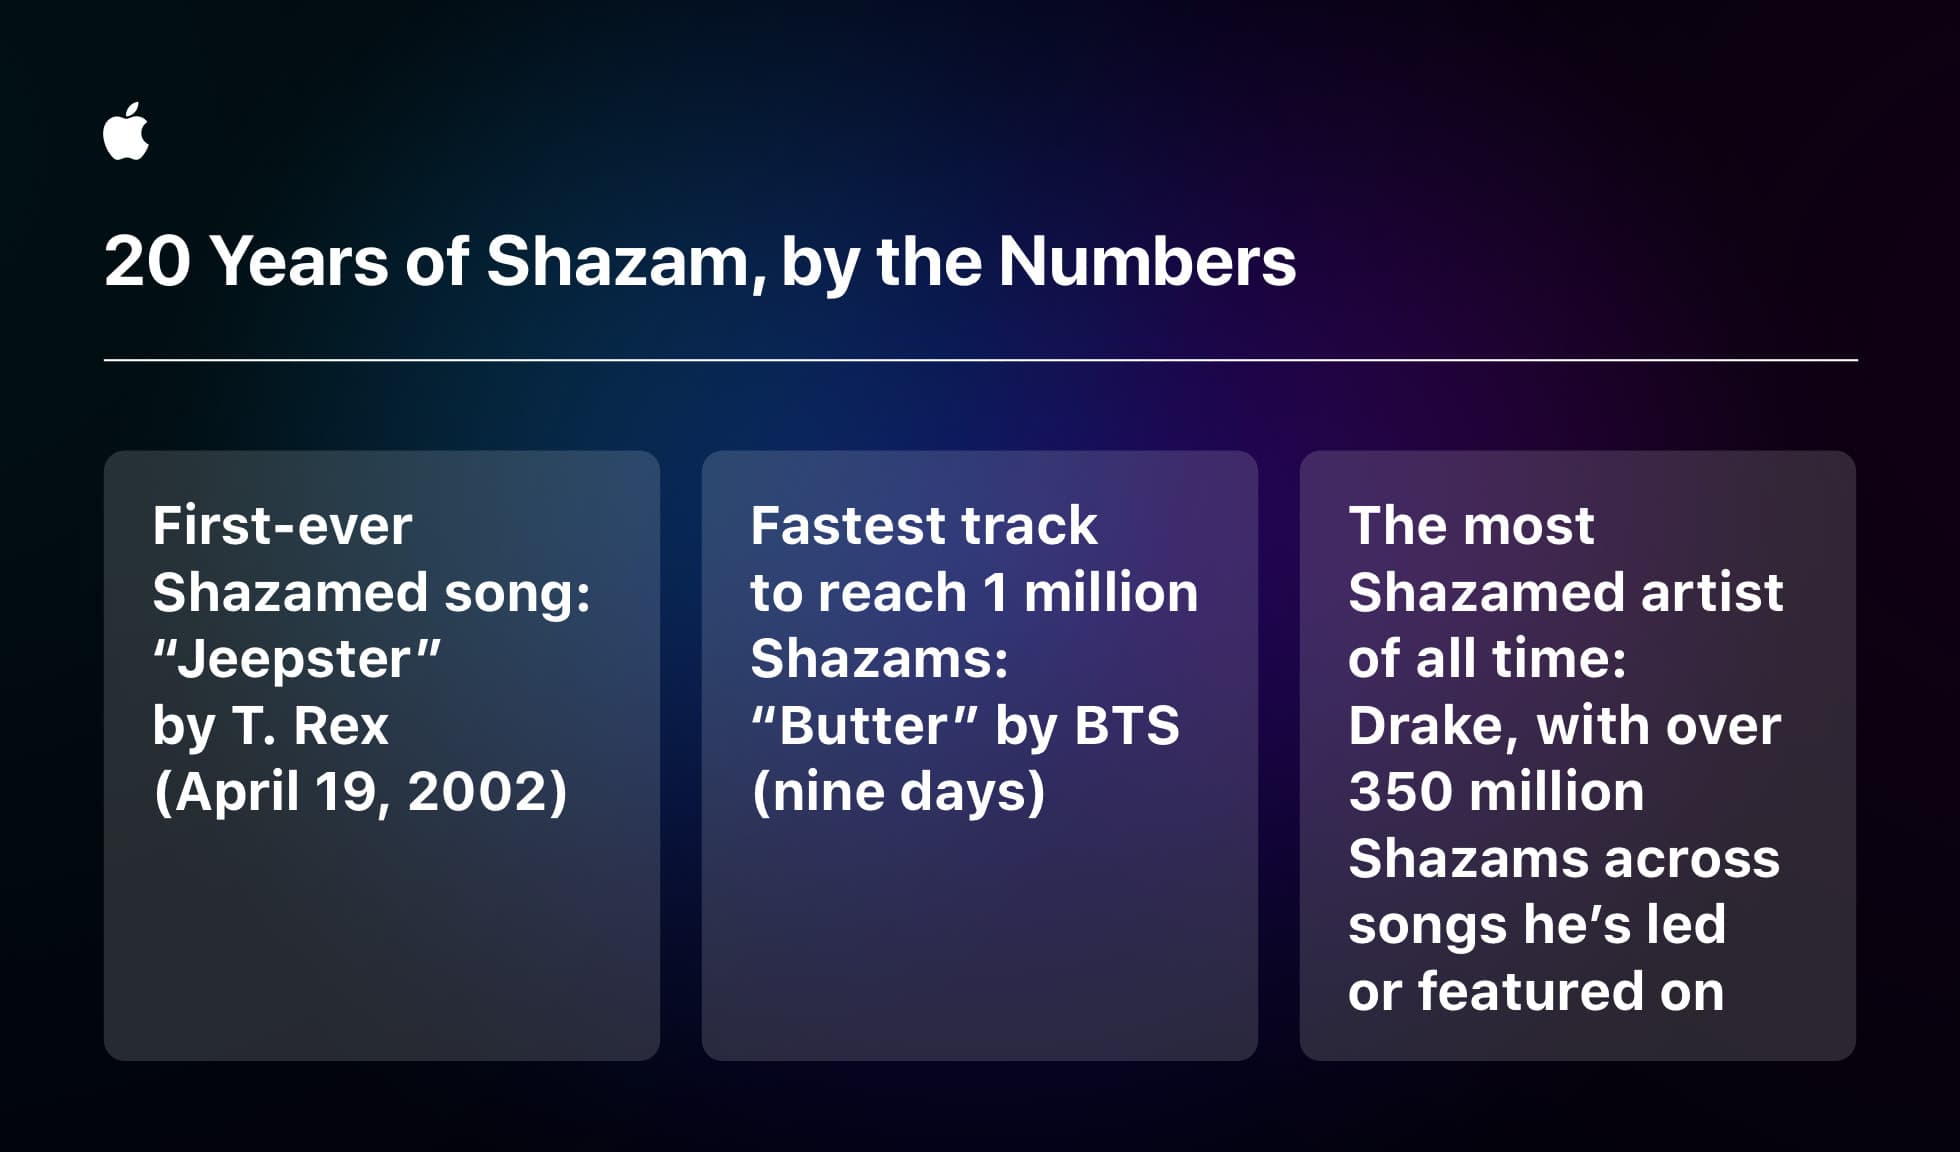 Check out some of Shazam's key numbers.